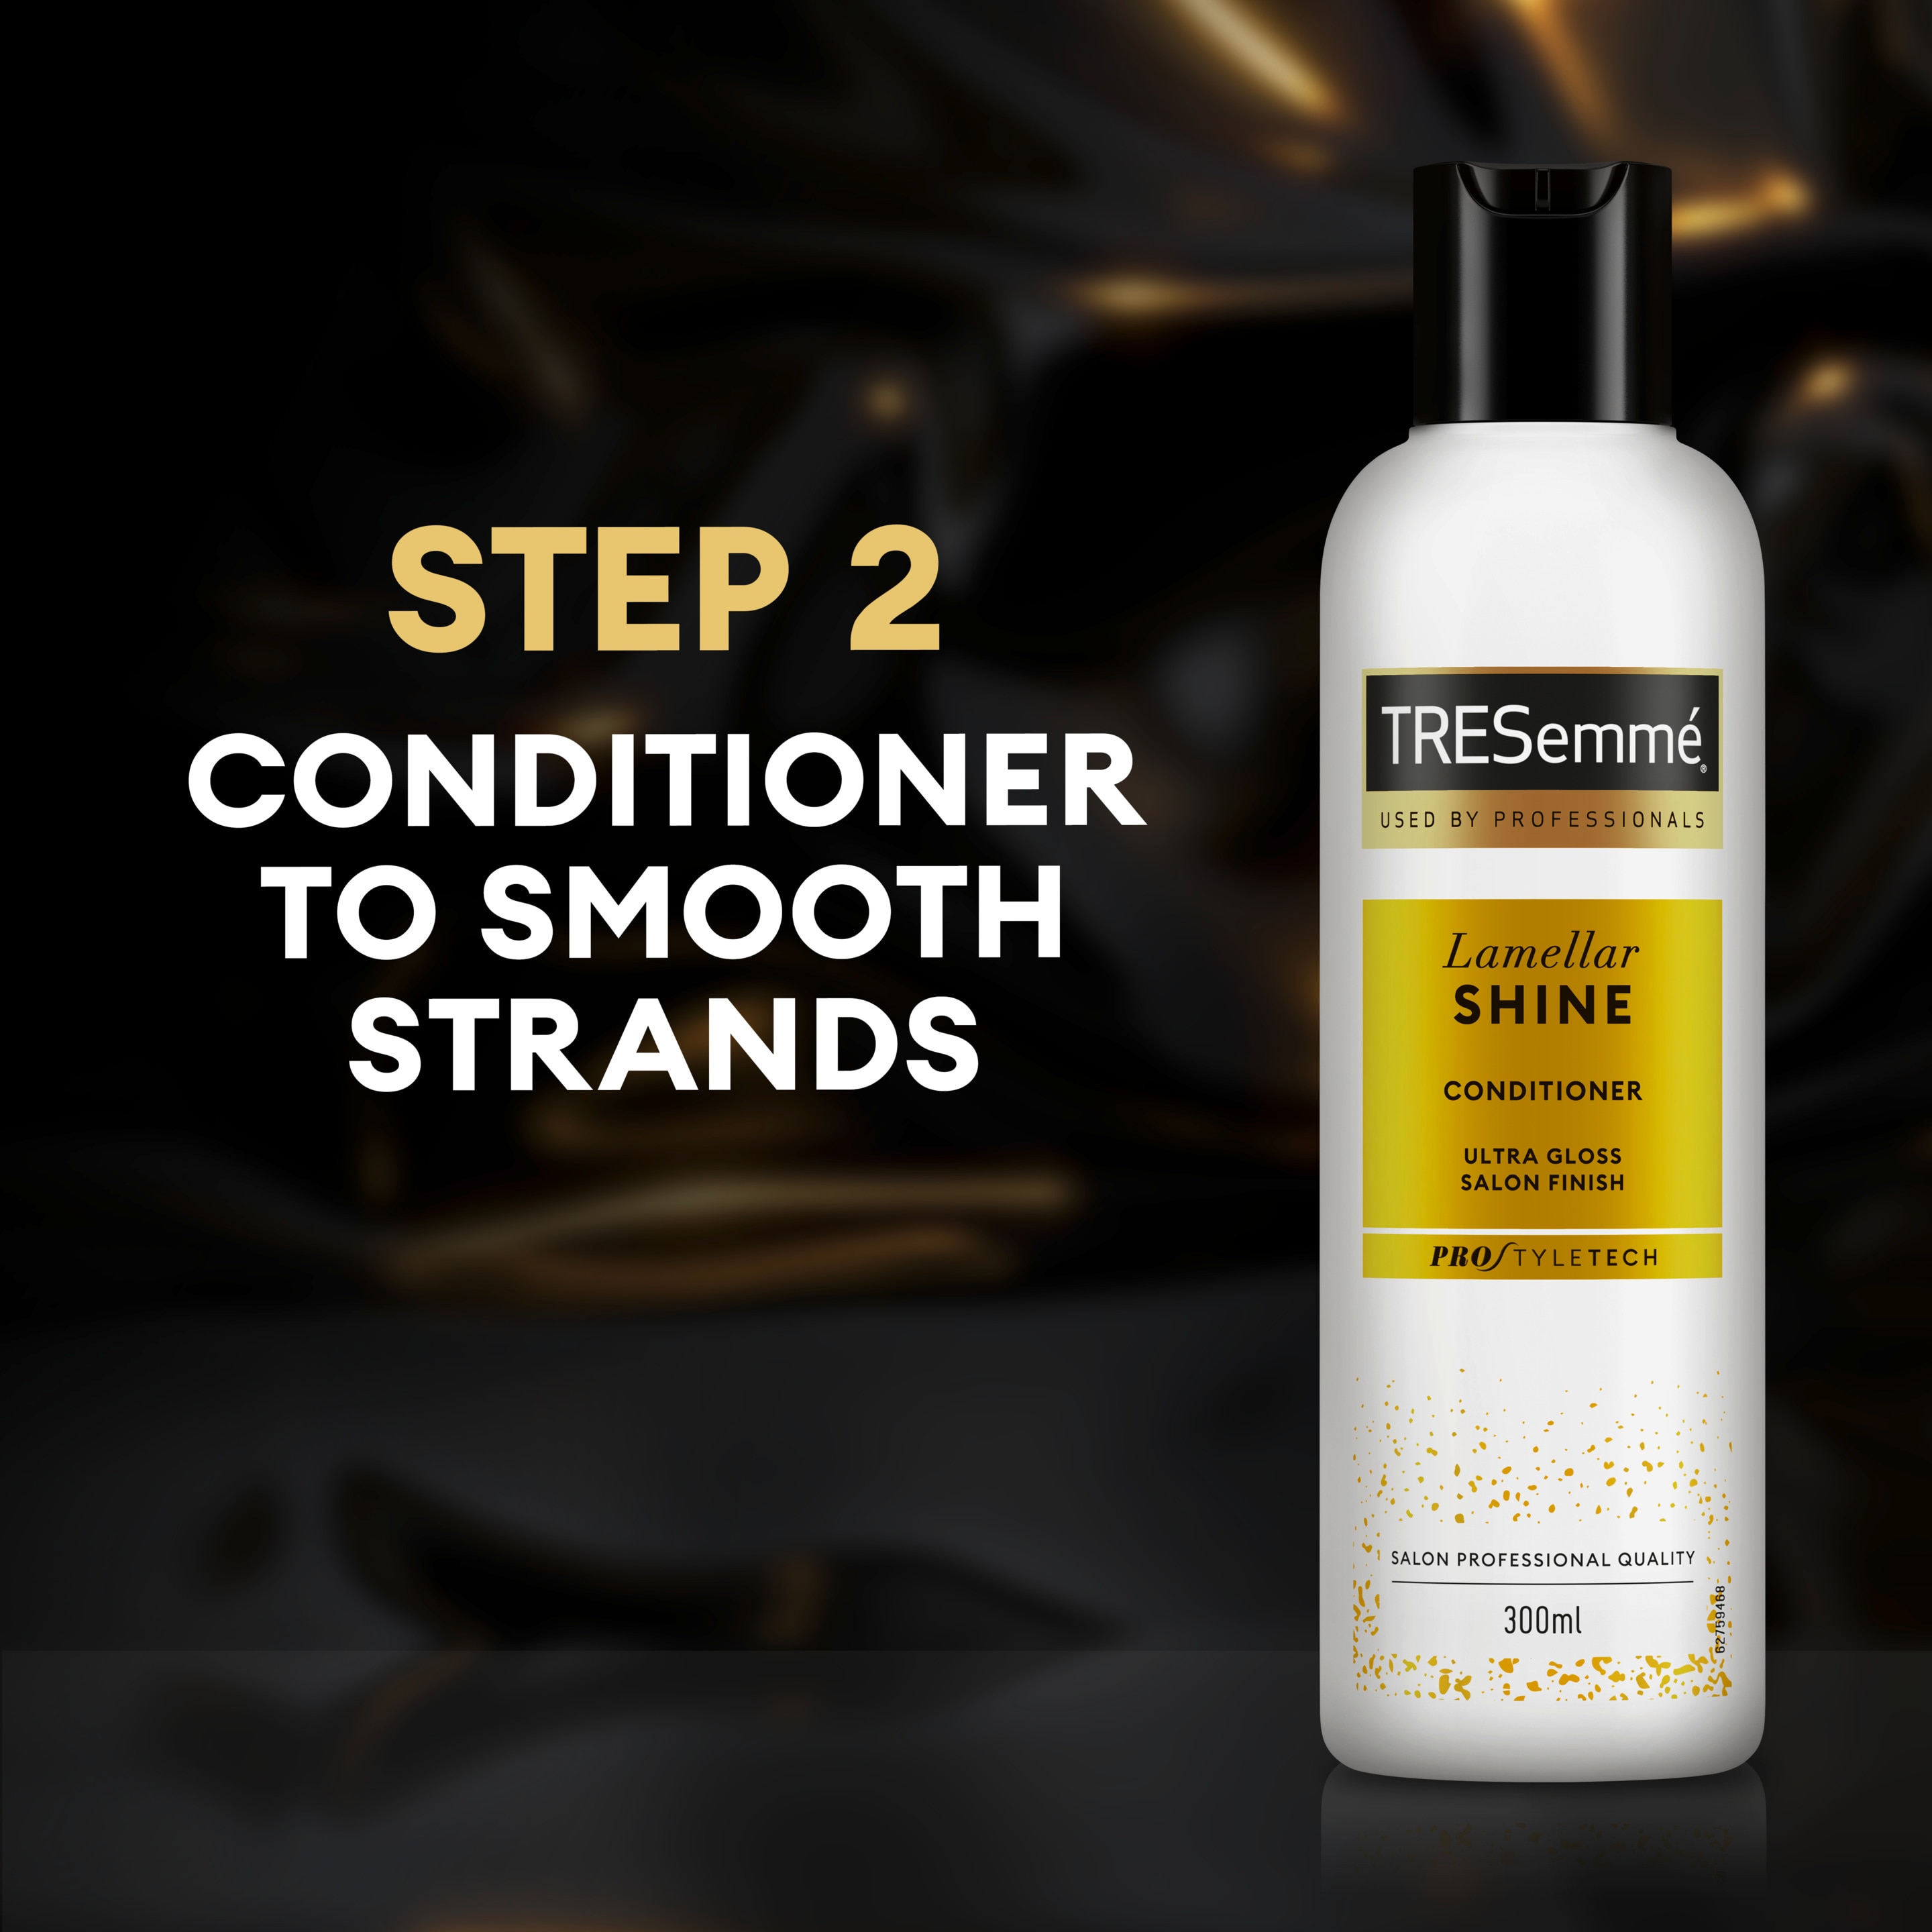 The micellar formula of our Colour Revitalise shampoo is gentle enough for daily use